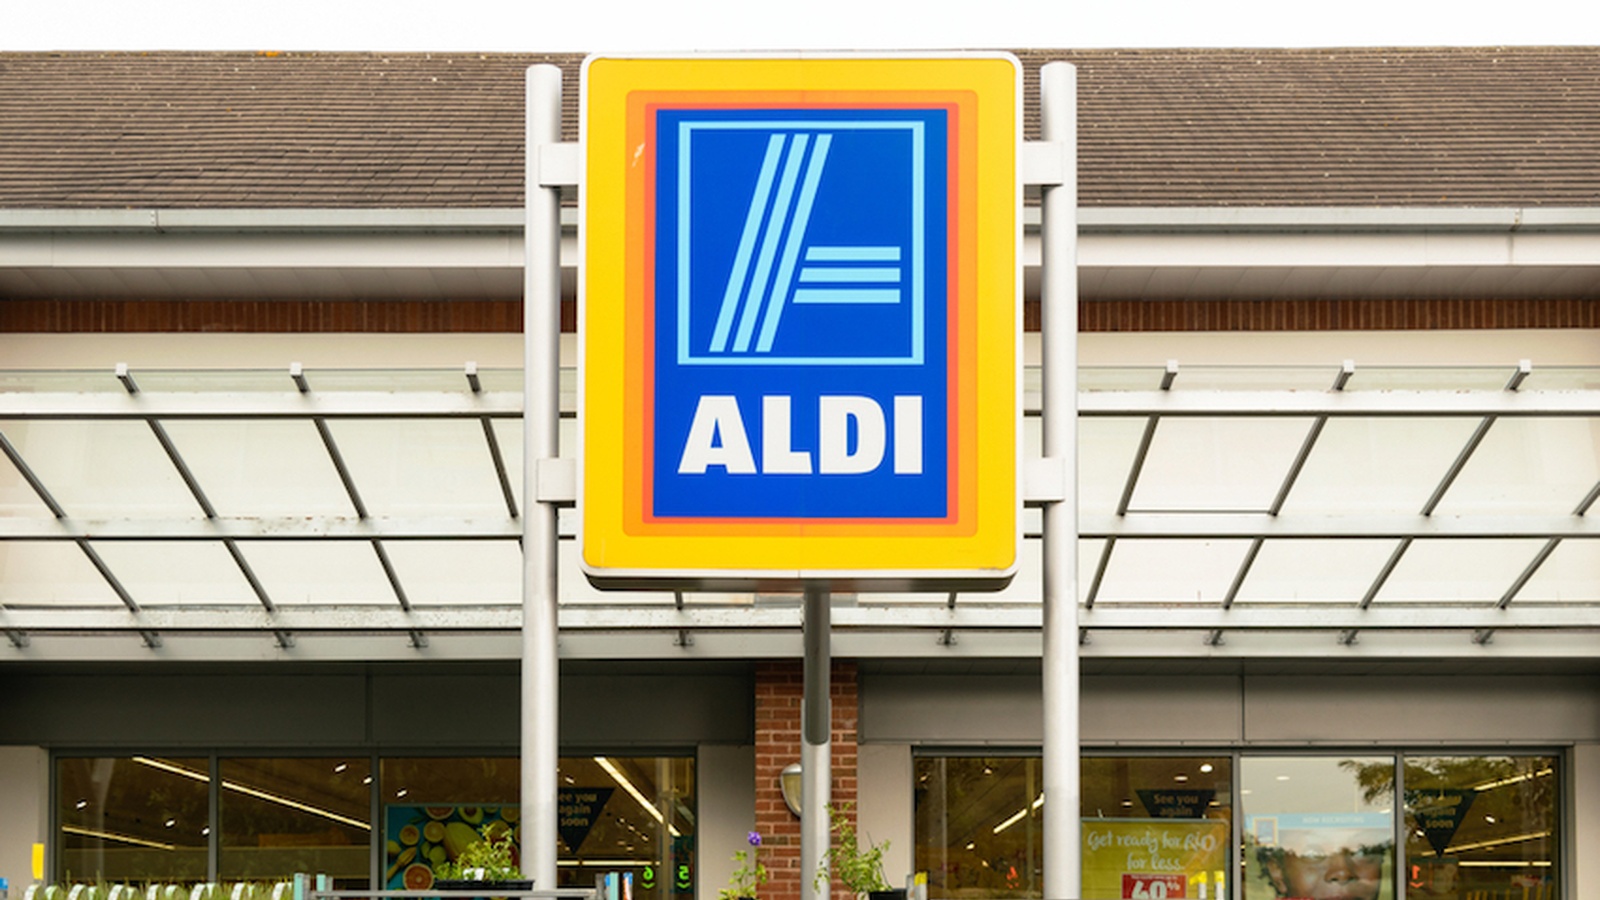 Is Aldi The Latest Competition For Whole Foods Market?